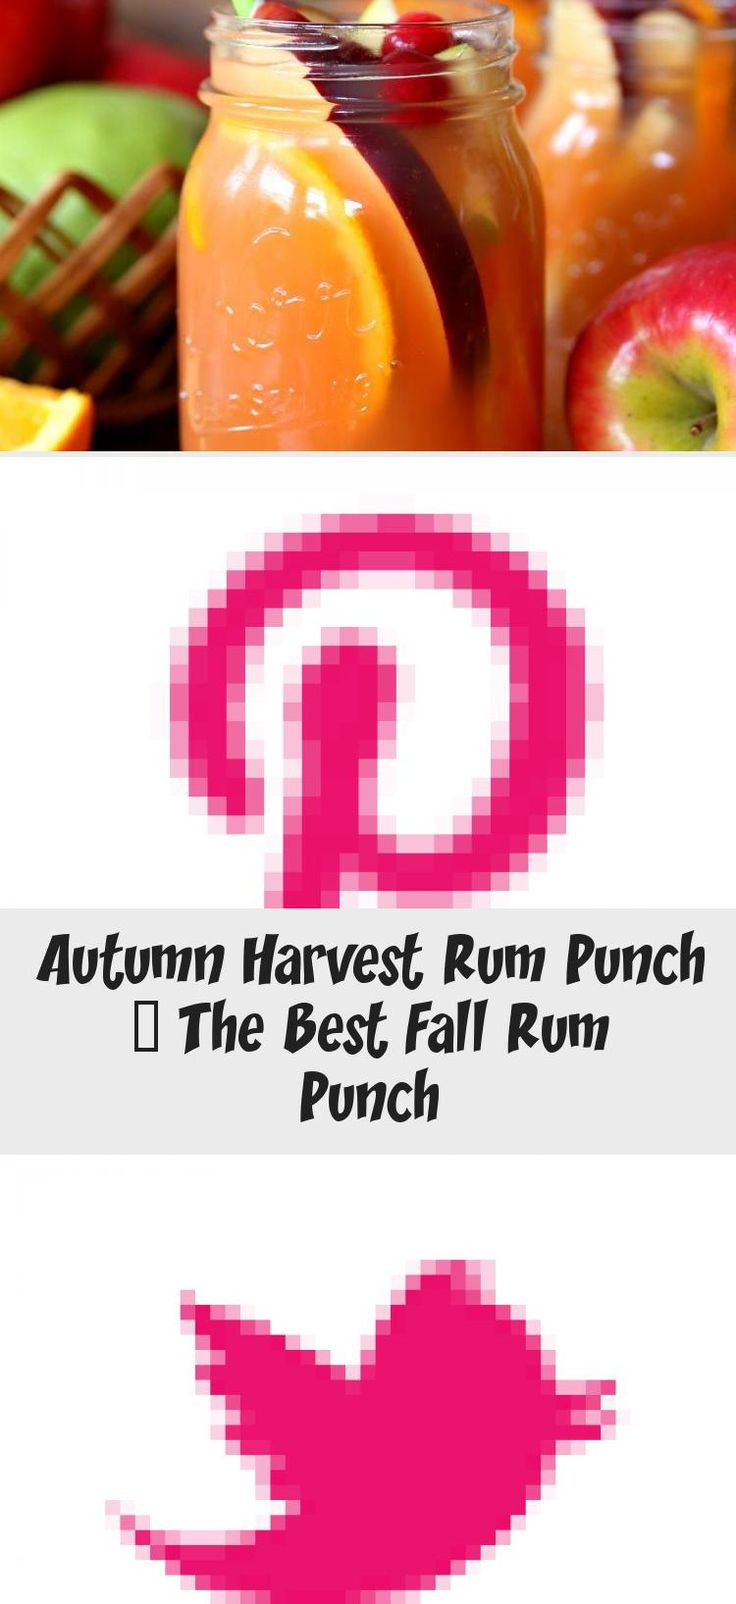 Fall Rum Drinks
 This Autumn Harvest Rum Punch has all the flavors of fall